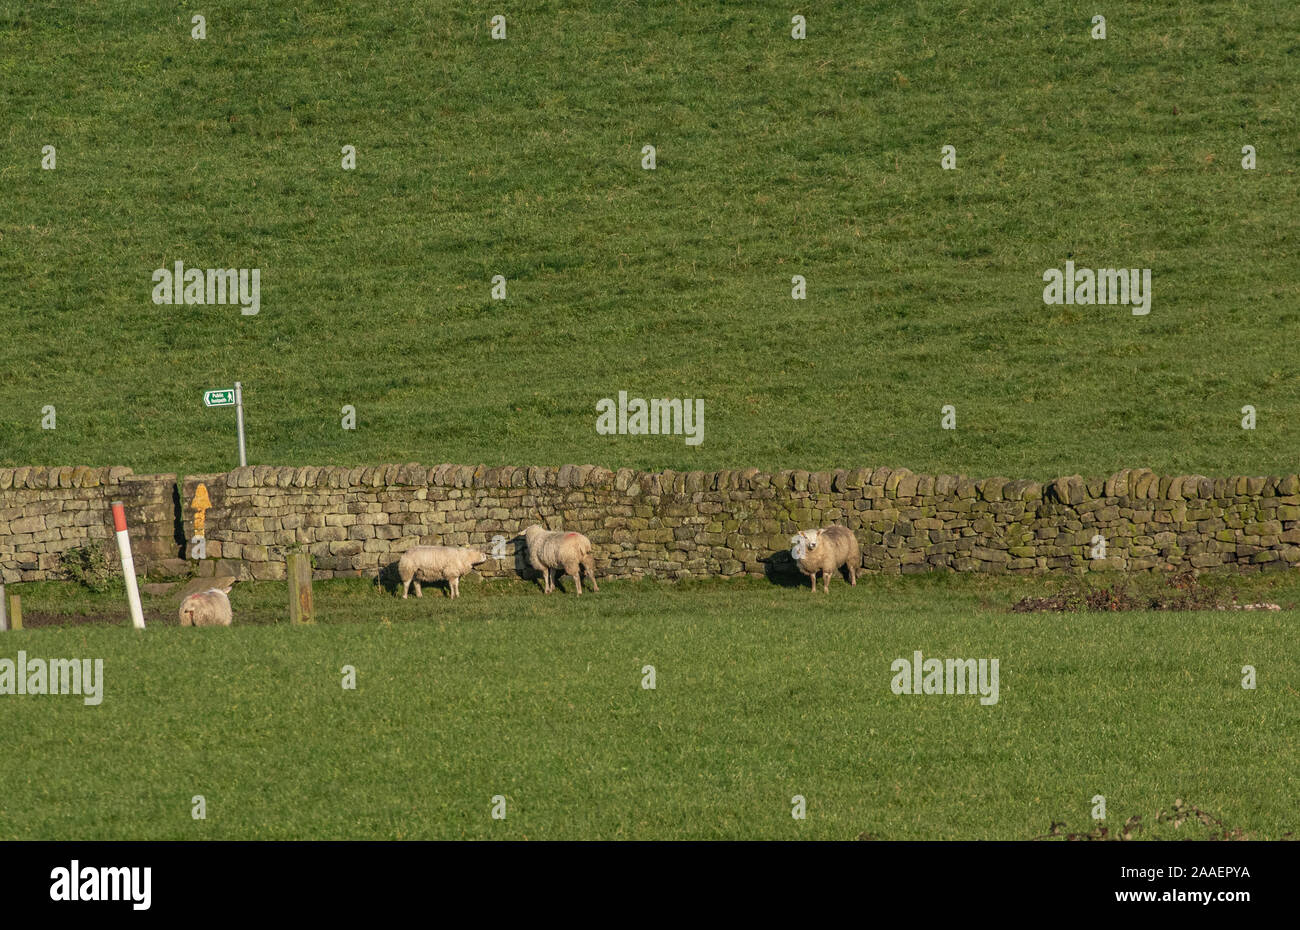 Sheep against a dry stone wall. Two sheep are licking the stone. Stock Photo